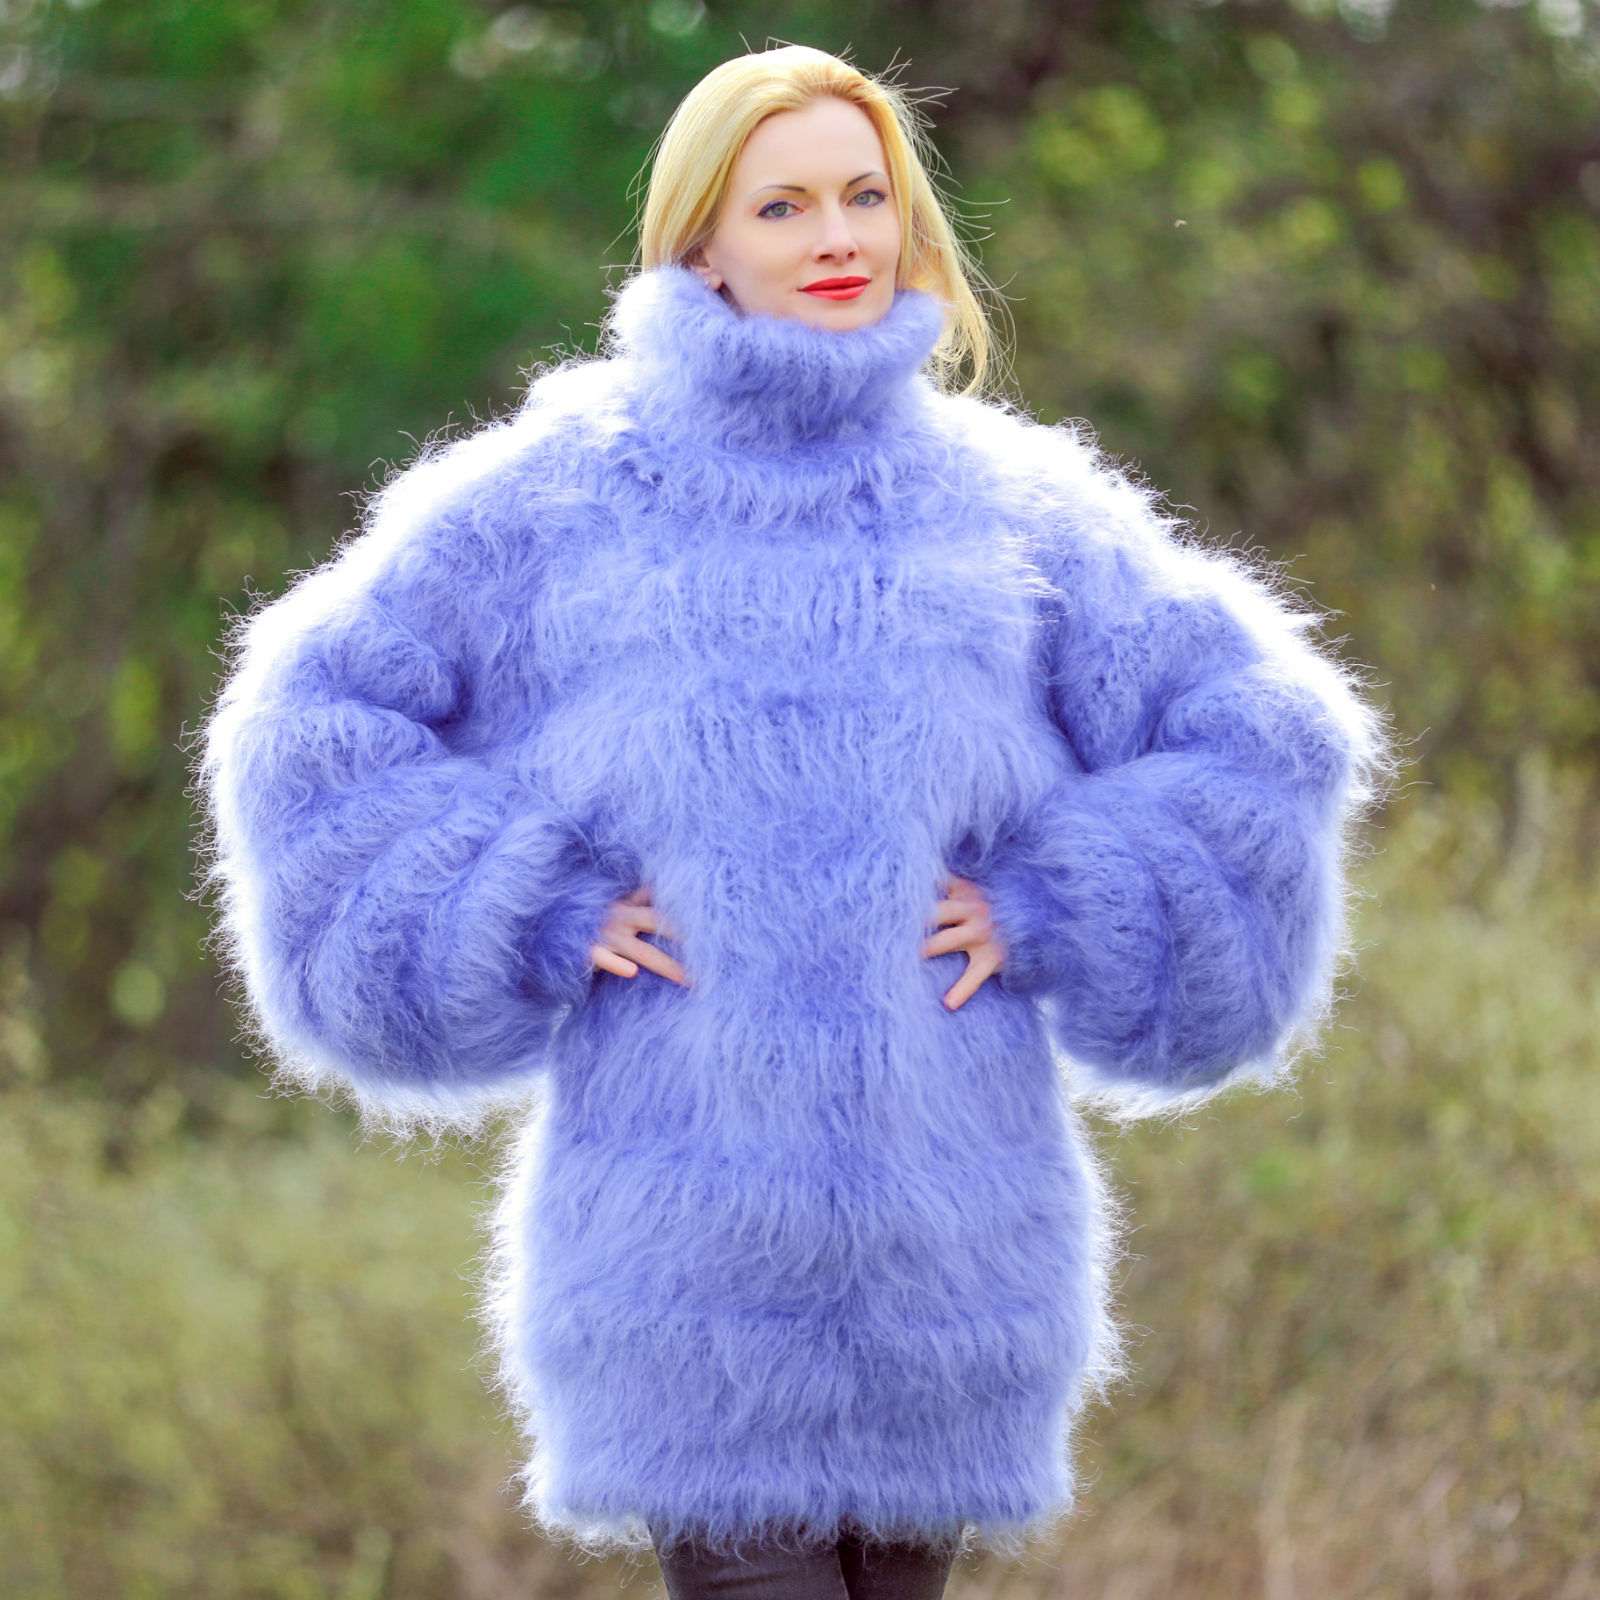 Blue thick fuzzy mohair sweater dress, made to order – SuperTanya